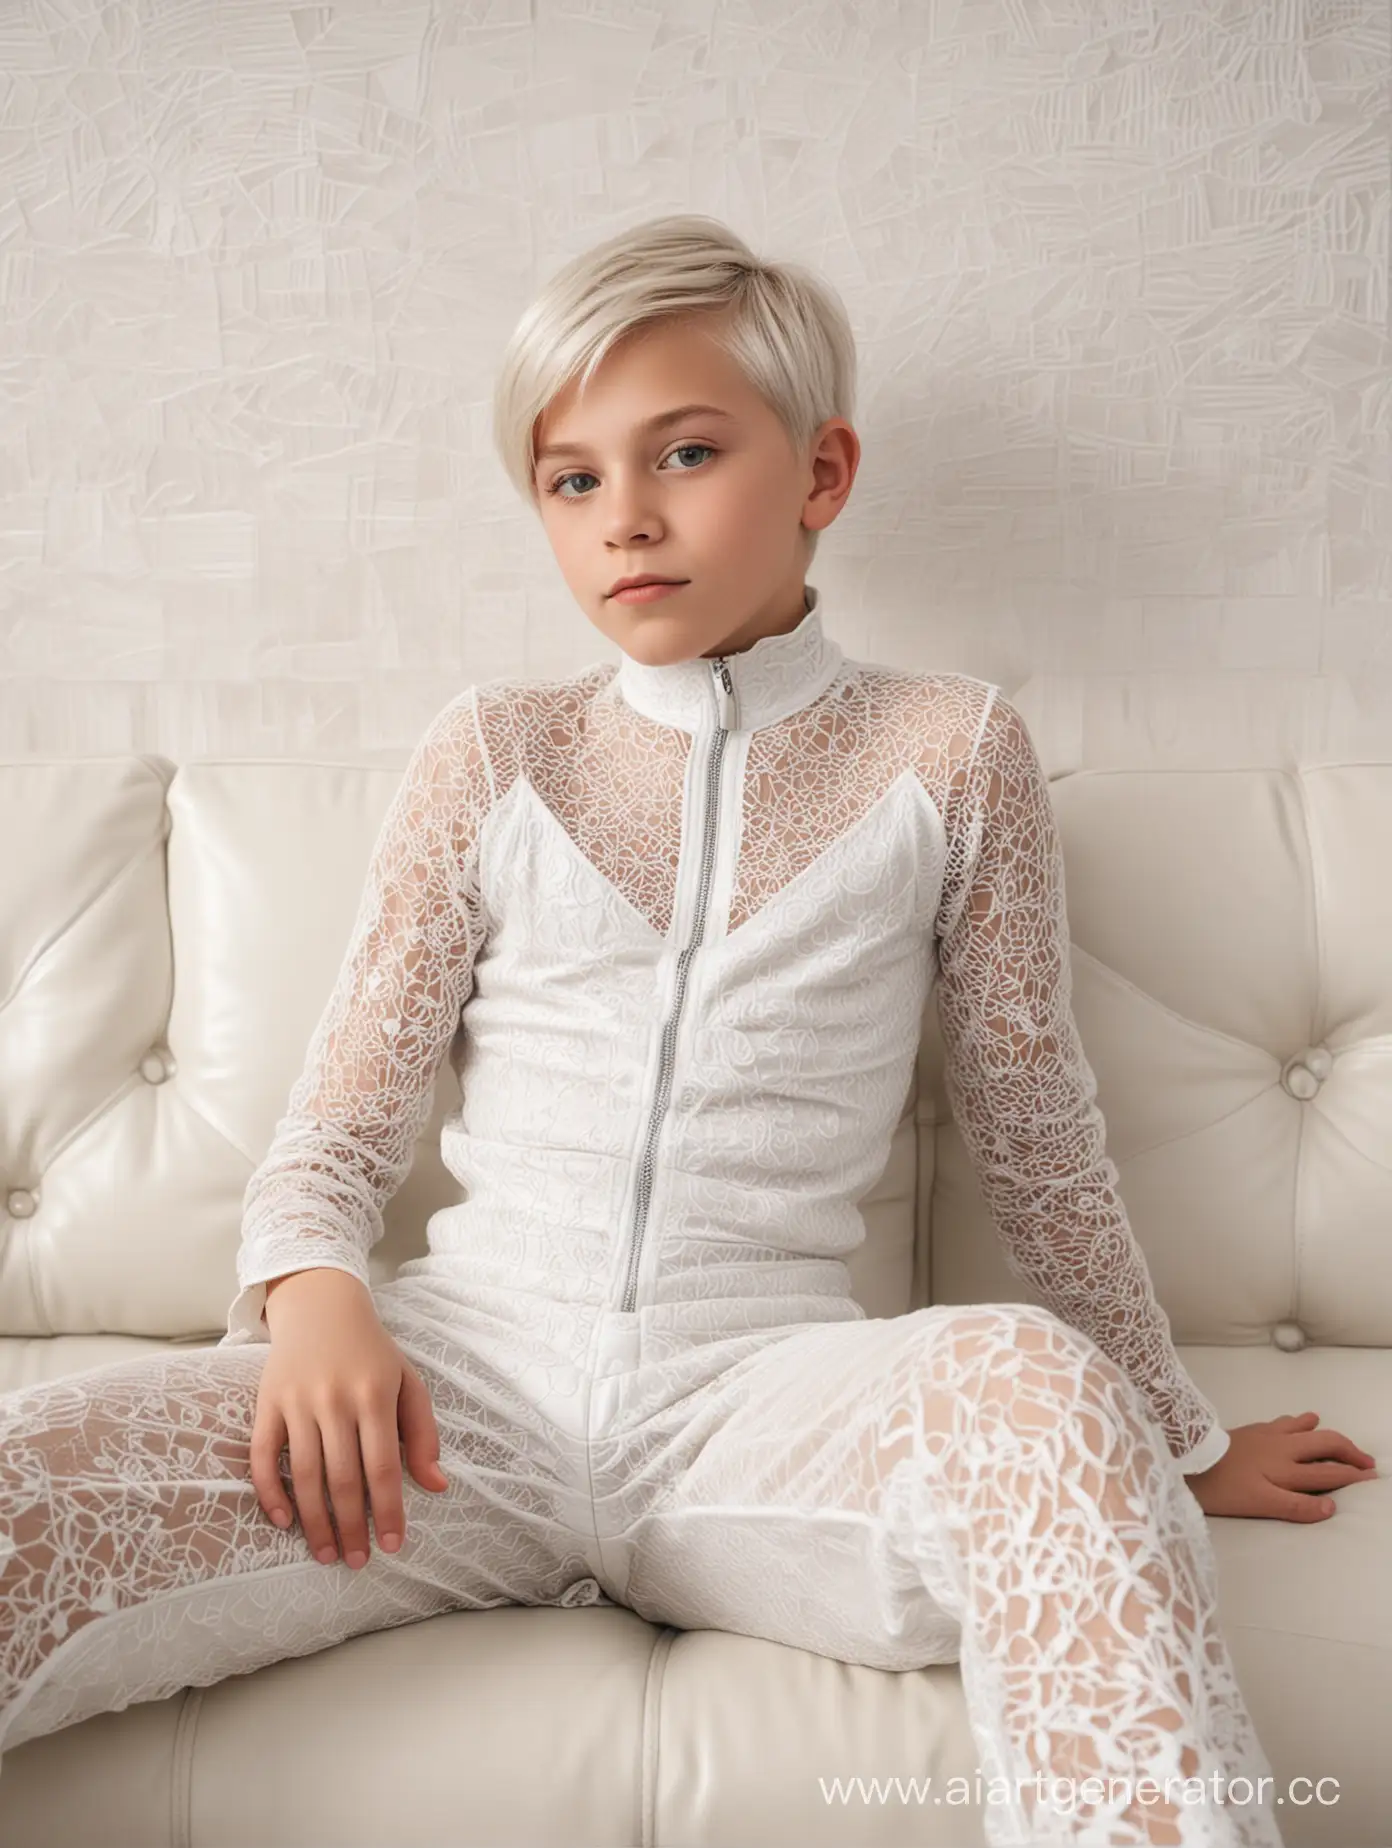 Boy-Relaxing-on-White-Leather-Couch-in-Lacy-Mesh-Jumpsuit